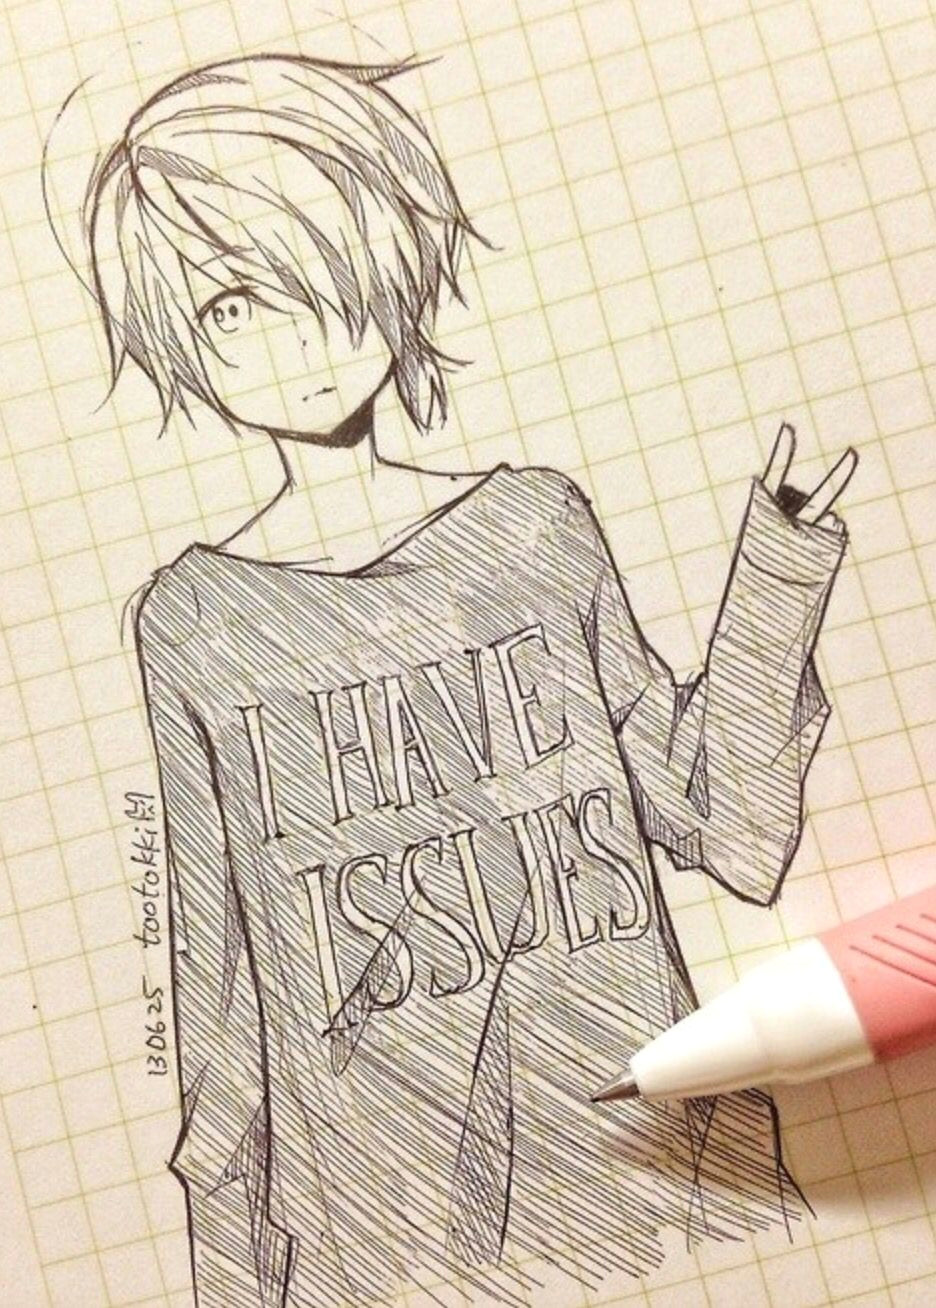 Anime Drawing Jpg Cute Anime Drawing tootokki I Have issues Sweater Anime Drawings